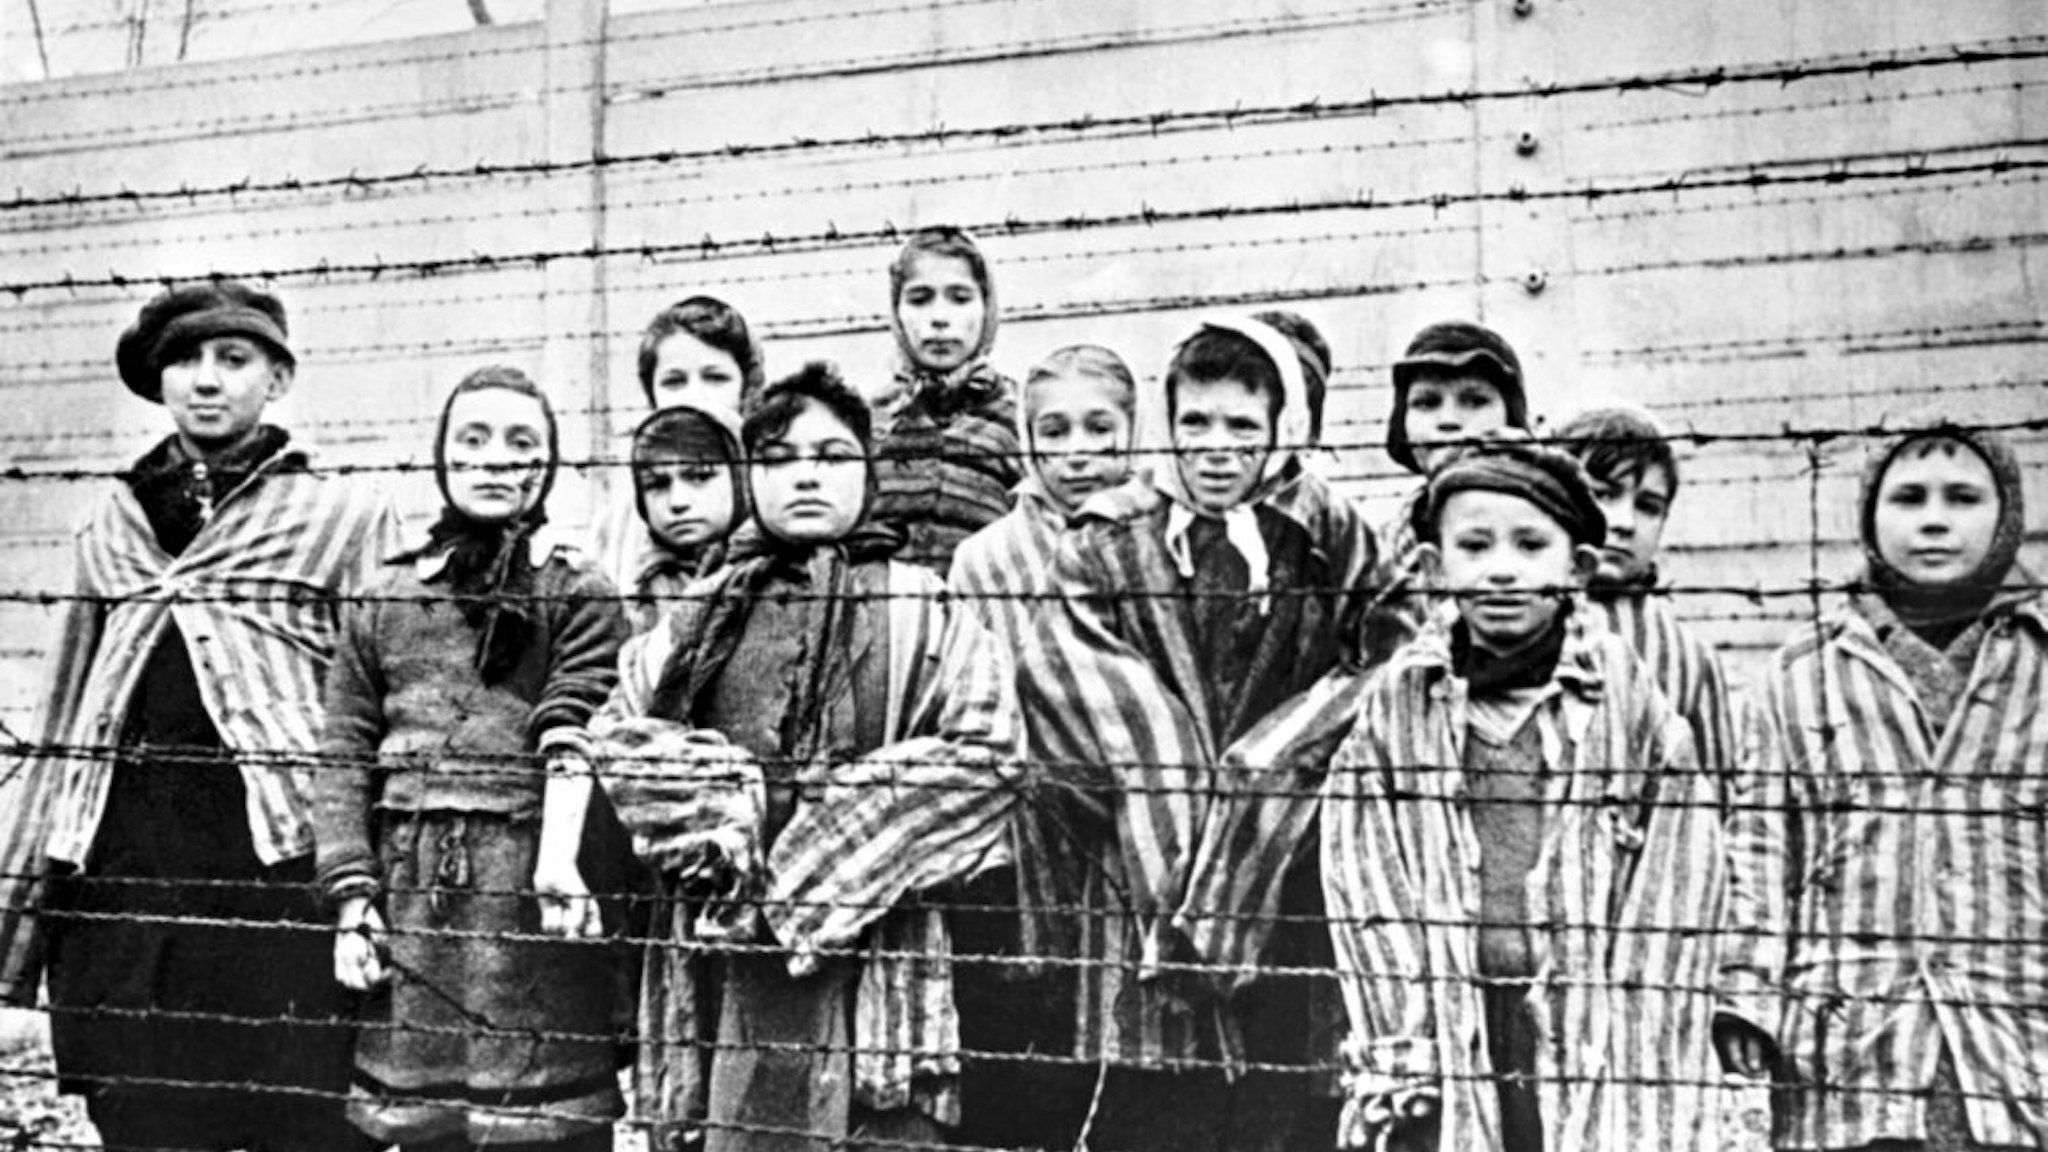 A group of child survivors behind a barbed wire fence at the Nazi concentration camp at Auschwitz-Birkenau in southern Poland, on the day of the camp’s liberation by the Red Army, 27th January 1945. Photo taken by Red Army photographer Captain Alexander Vorontsov during the making of a film about the liberation of the camp. The children were dressed in adult uniforms by the Russians. The children are (left to right): Tomy Schwarz (later Shacham), Miriam Ziegler, Paula Lebovics (front), Ruth Webber, Berta Weinhaber (later Bracha Katz), Erika Winter (later Dohan), Marta Weiss (later Wise), Eva Weiss (later Slonim), Gabor Hirsch (just visible behind Eva Weiss), Gabriel Neumann, Robert Schlesinger (later Shmuel Schelach), Eva Mozes Kor, and Miriam Mozes Zeiger.